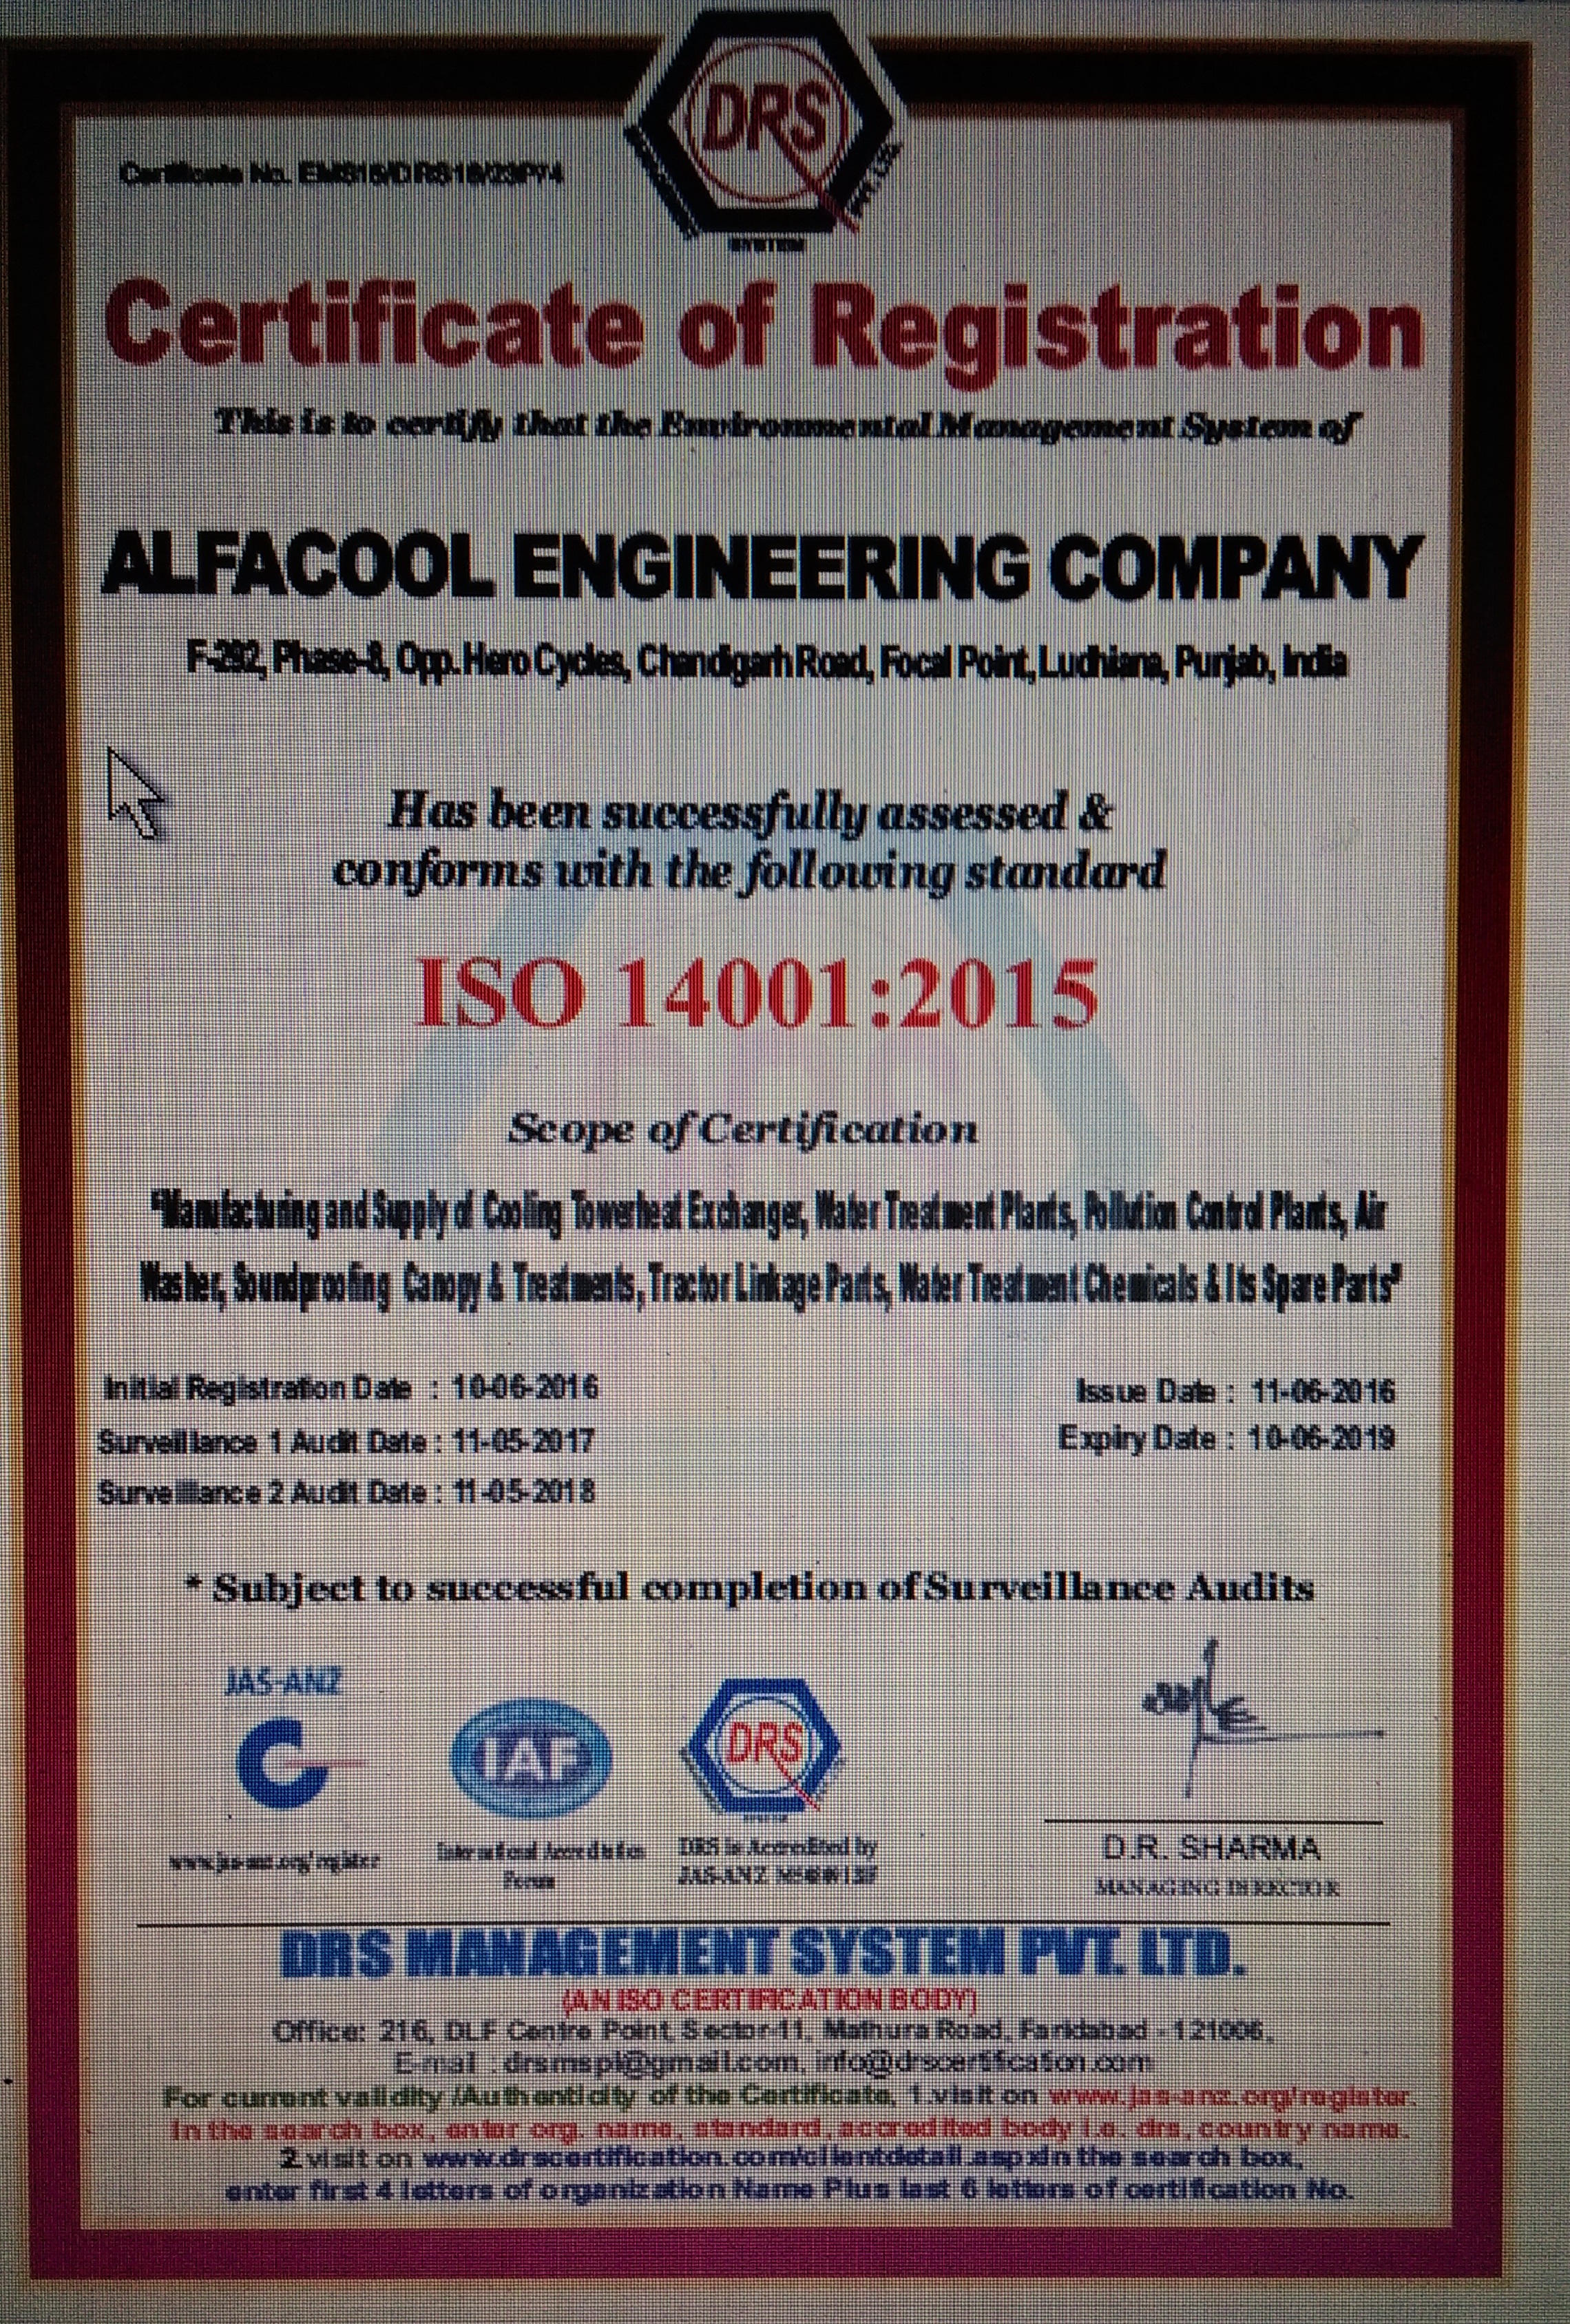 iso certificate14001:2015